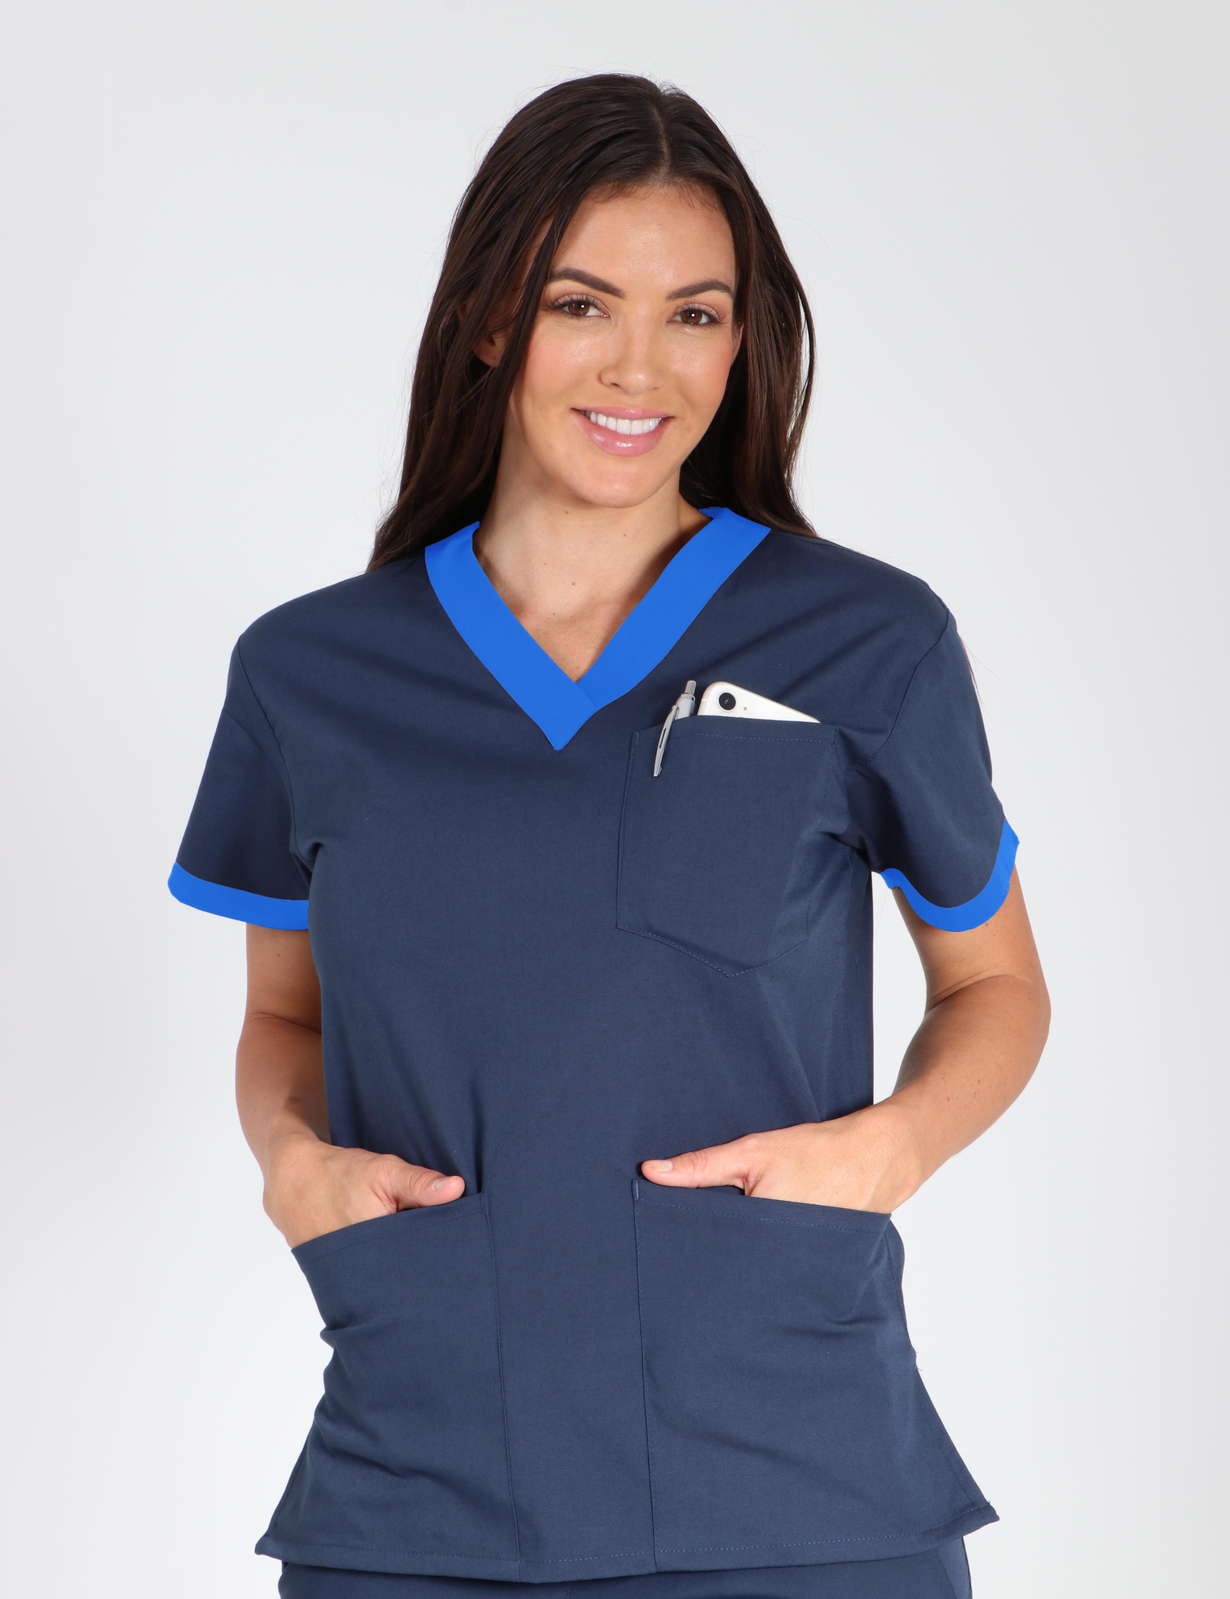 Perth Hospital - Medical Imaging Assistant (Contrast V-neck in Navy with Royal Trim and Cargo Pants incl Logos)